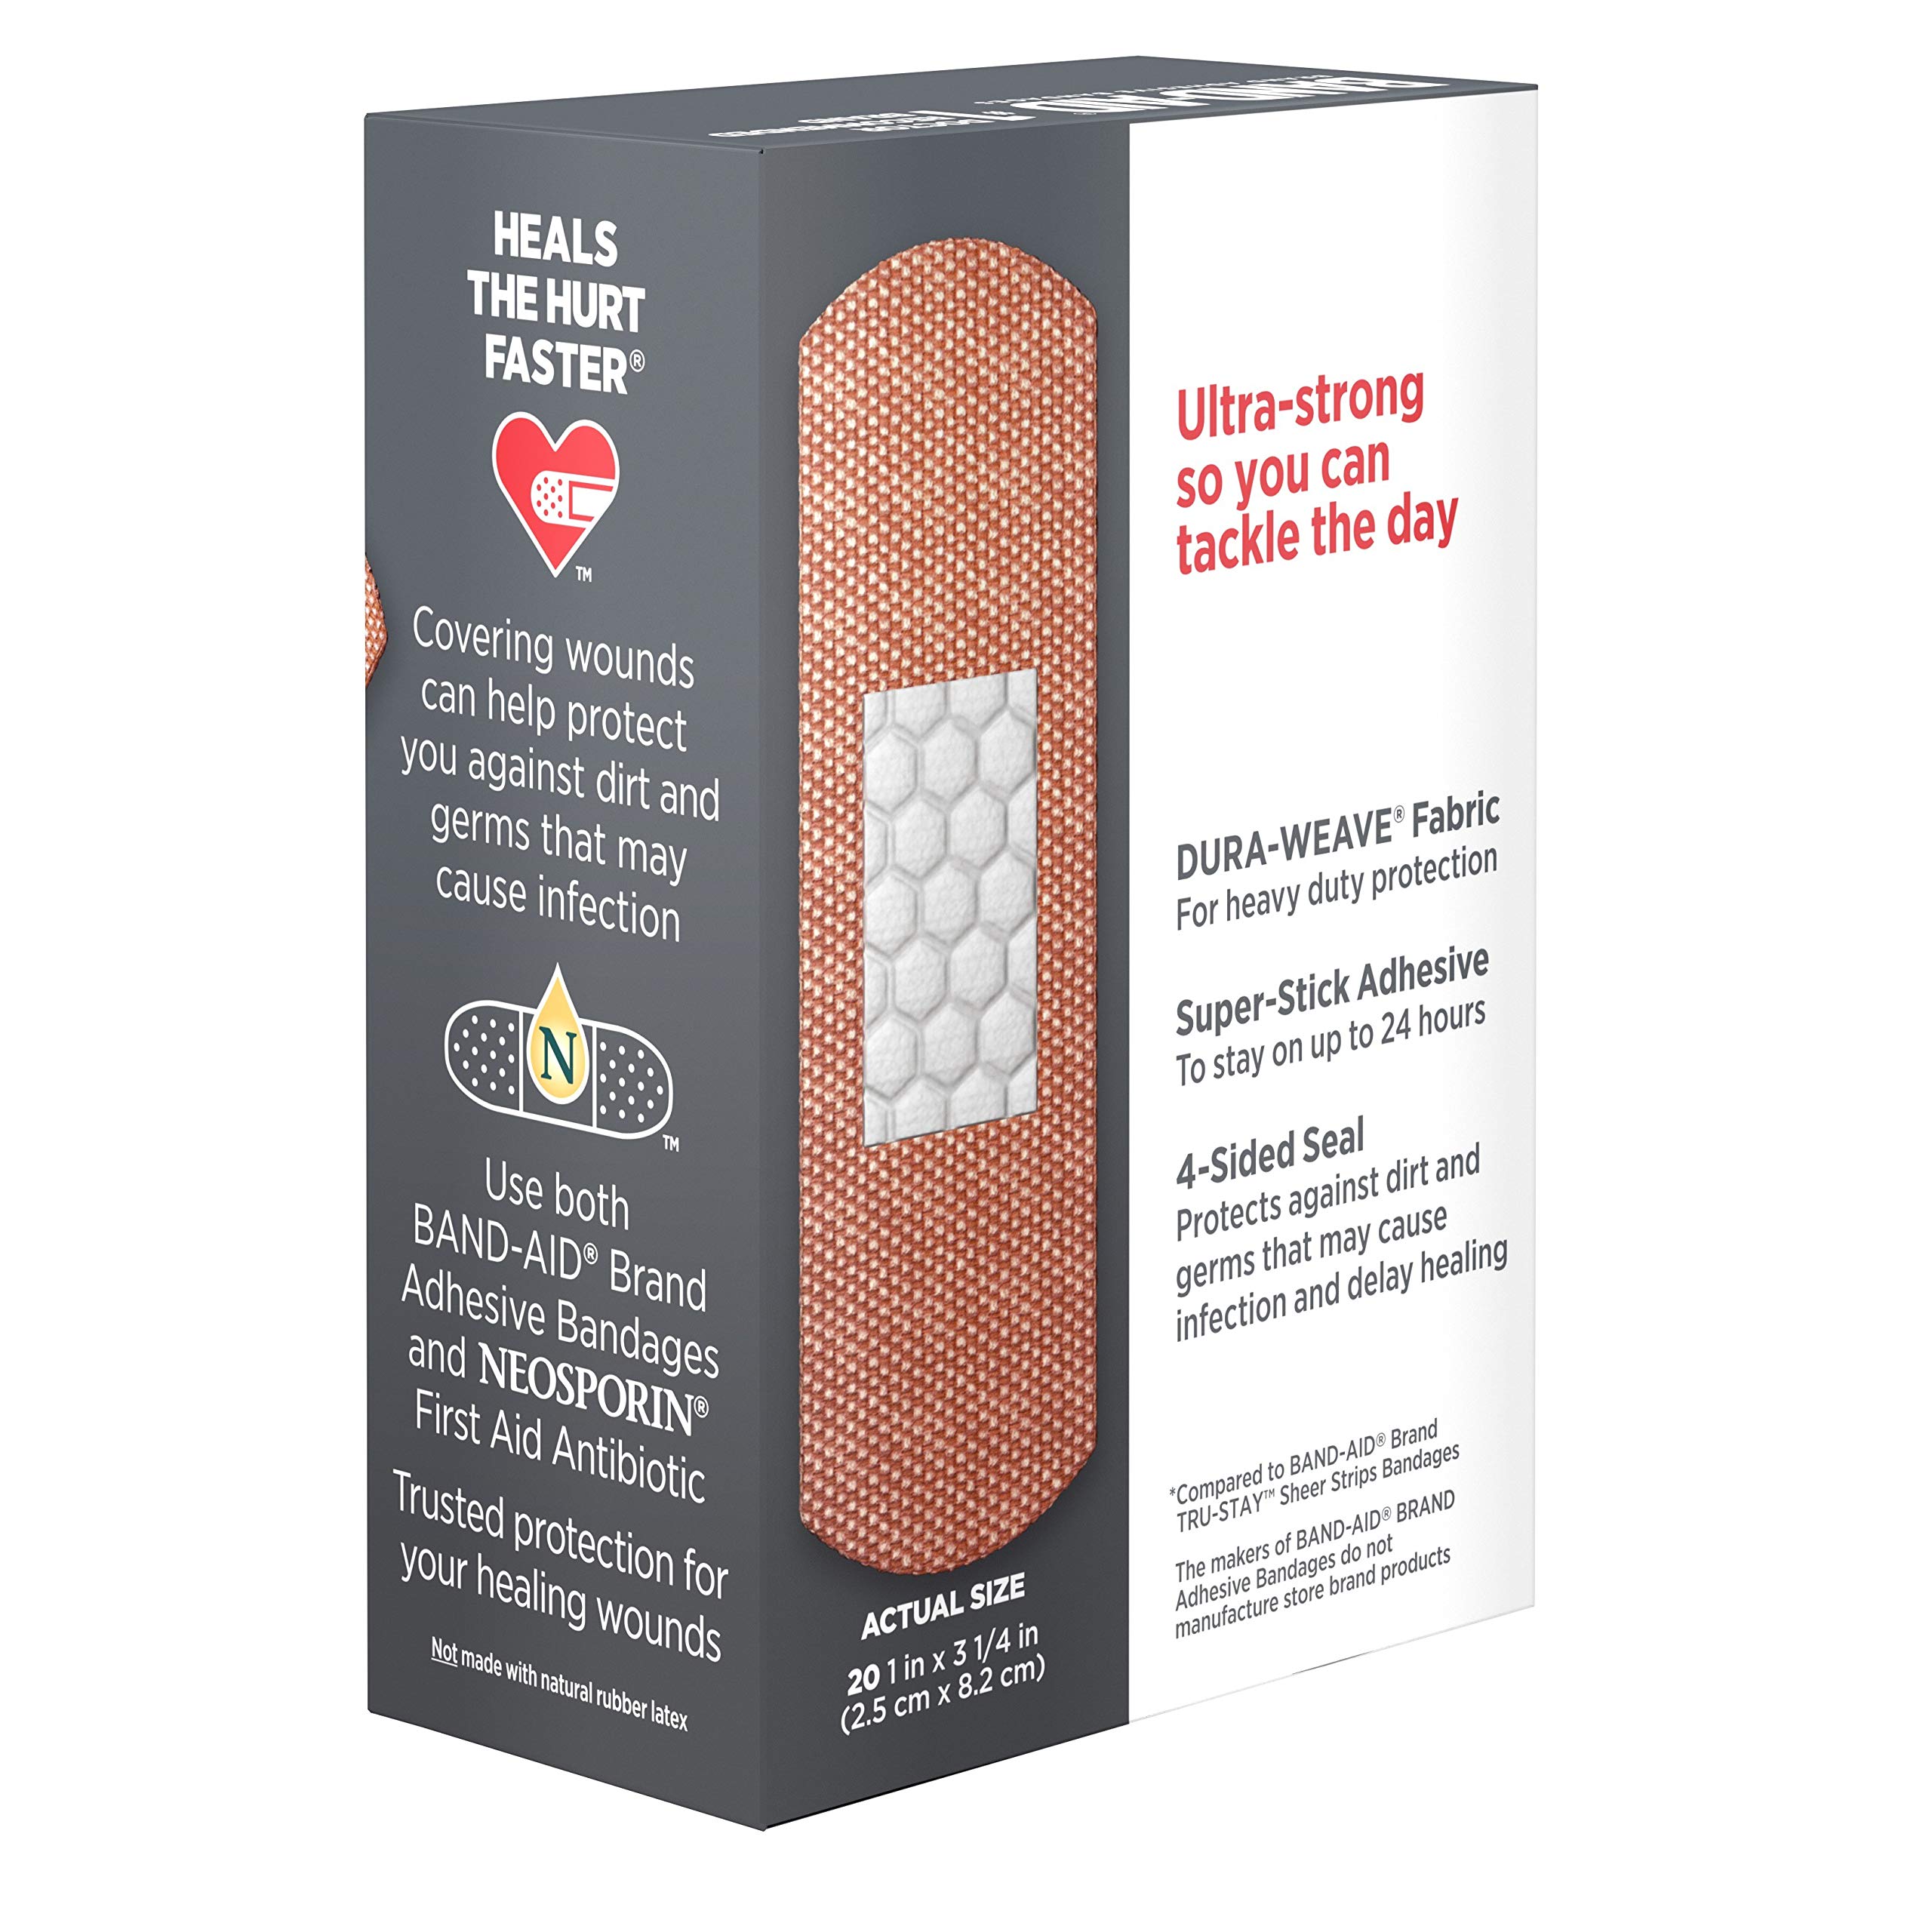 Band-Aid Brand Tough Strips Adhesive Bandage for Minor Cuts & Scrapes, All One Size, 20 ct